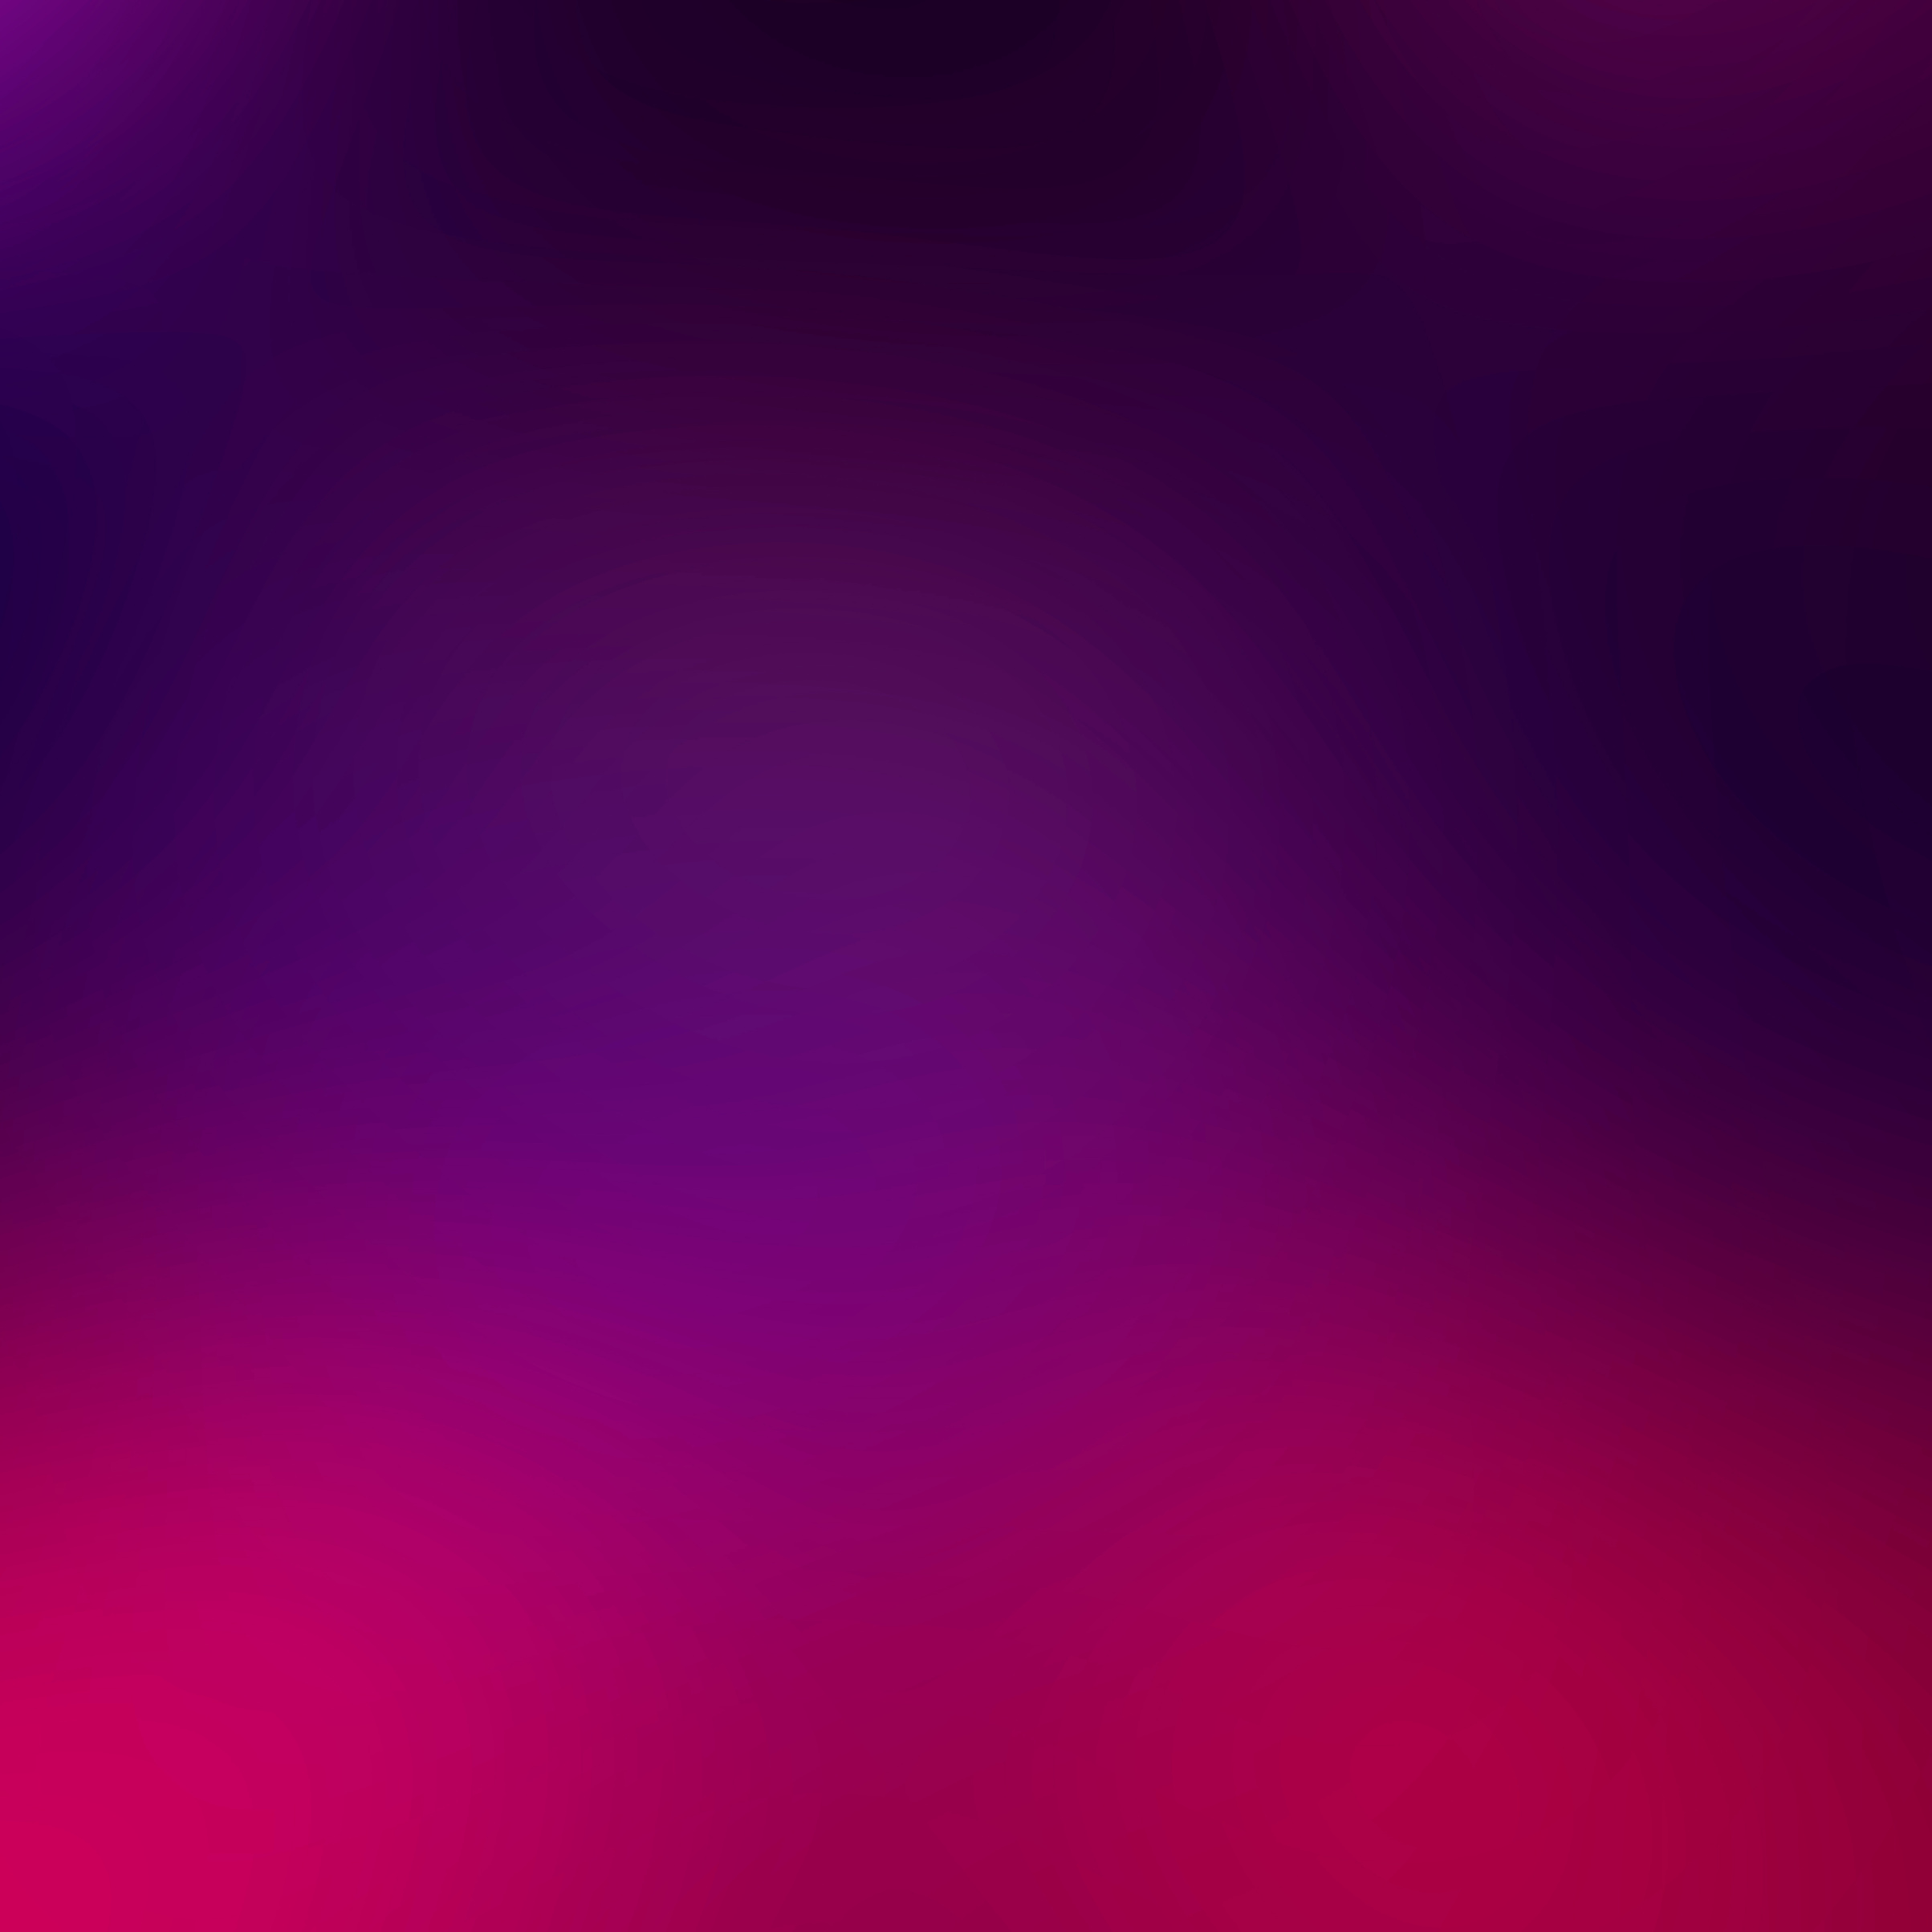 abstract purple pink blurred  background with gradient color